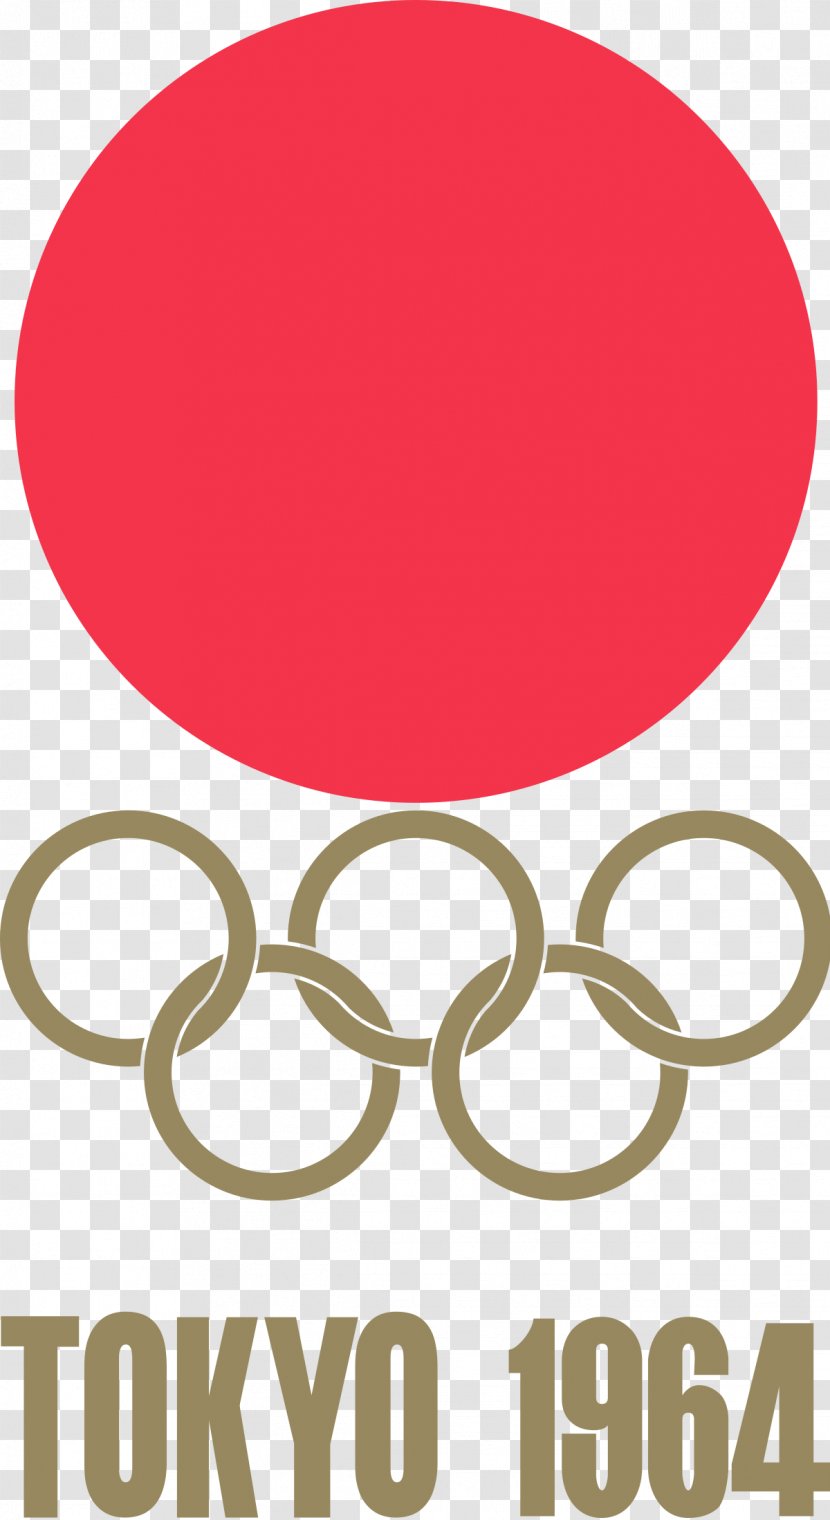 1964 Summer Olympics 2020 1940 Winter Olympic Games Transparent PNG